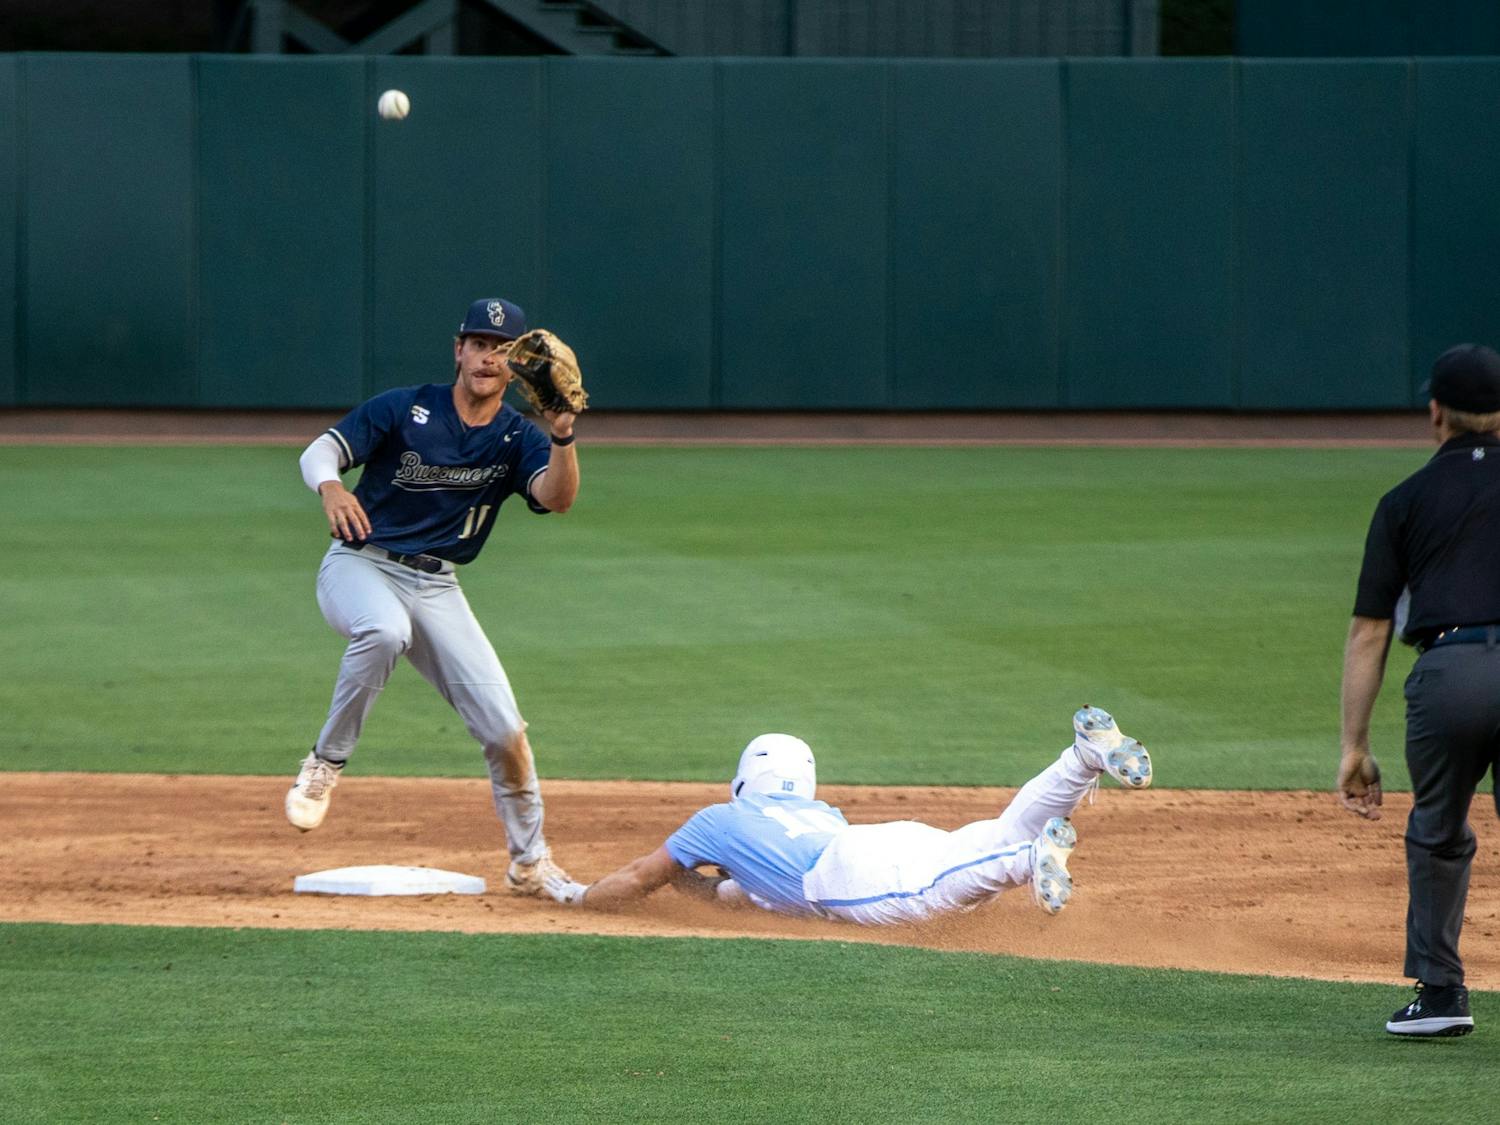 Sophomore infielder Mac Horvath (10) slides into second base during UNC's game against Charleston Southern at Boshamer Stadium on May 11, 2022. UNC won 12-1.